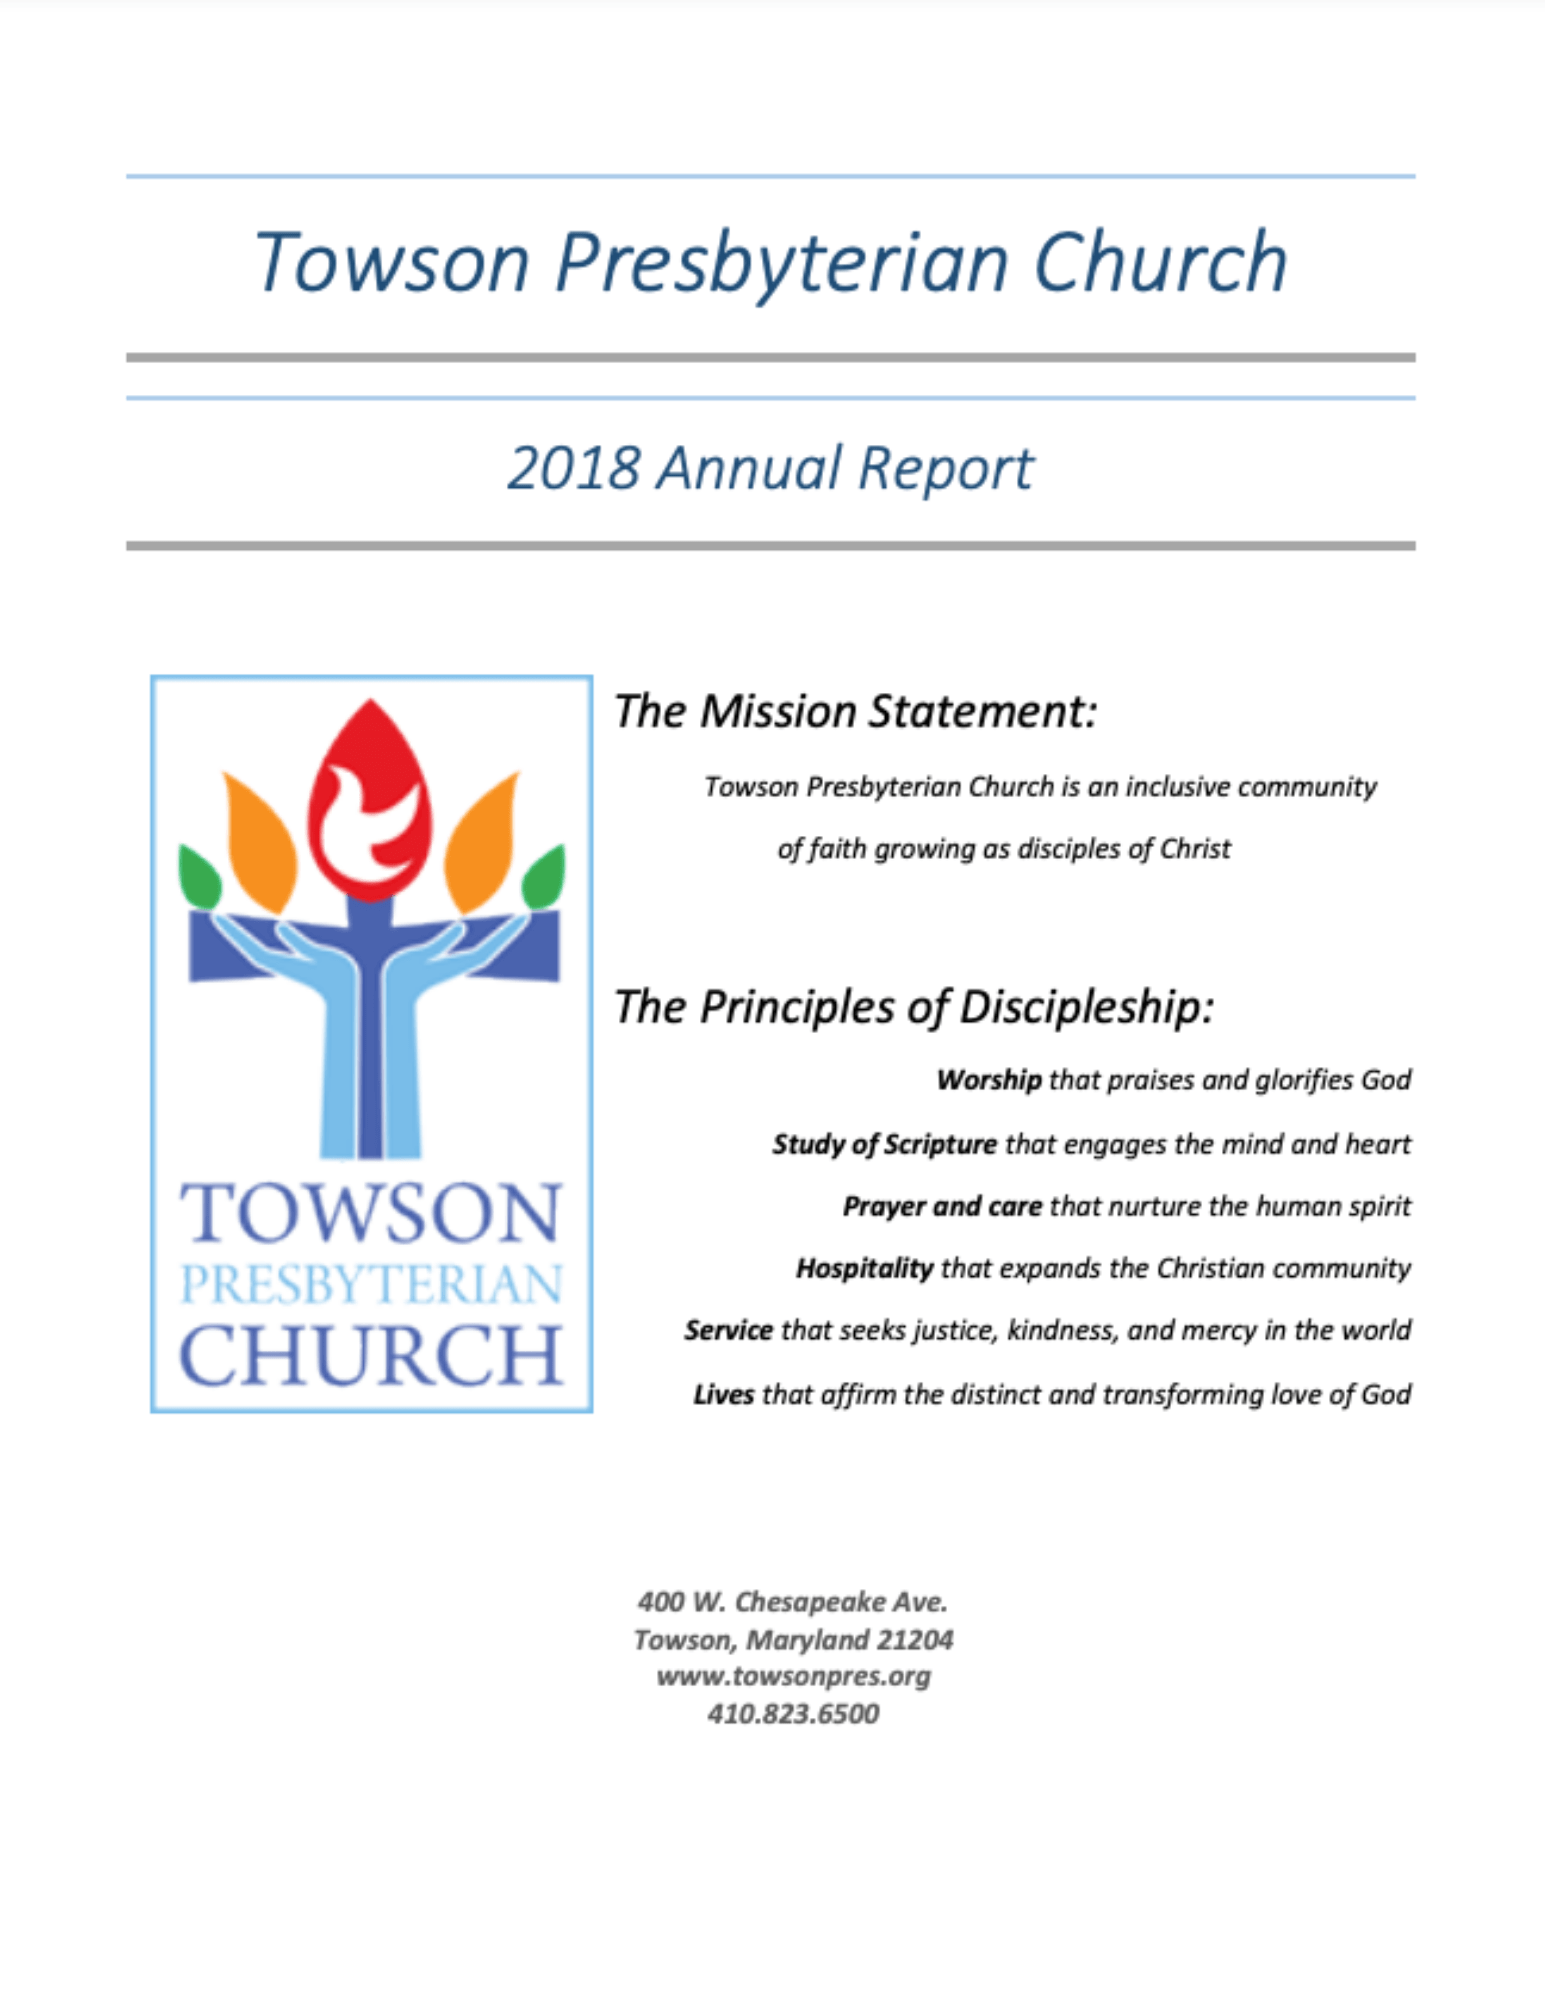 Infographic of the Towson Presbyterian Church 2018 Annual Report.